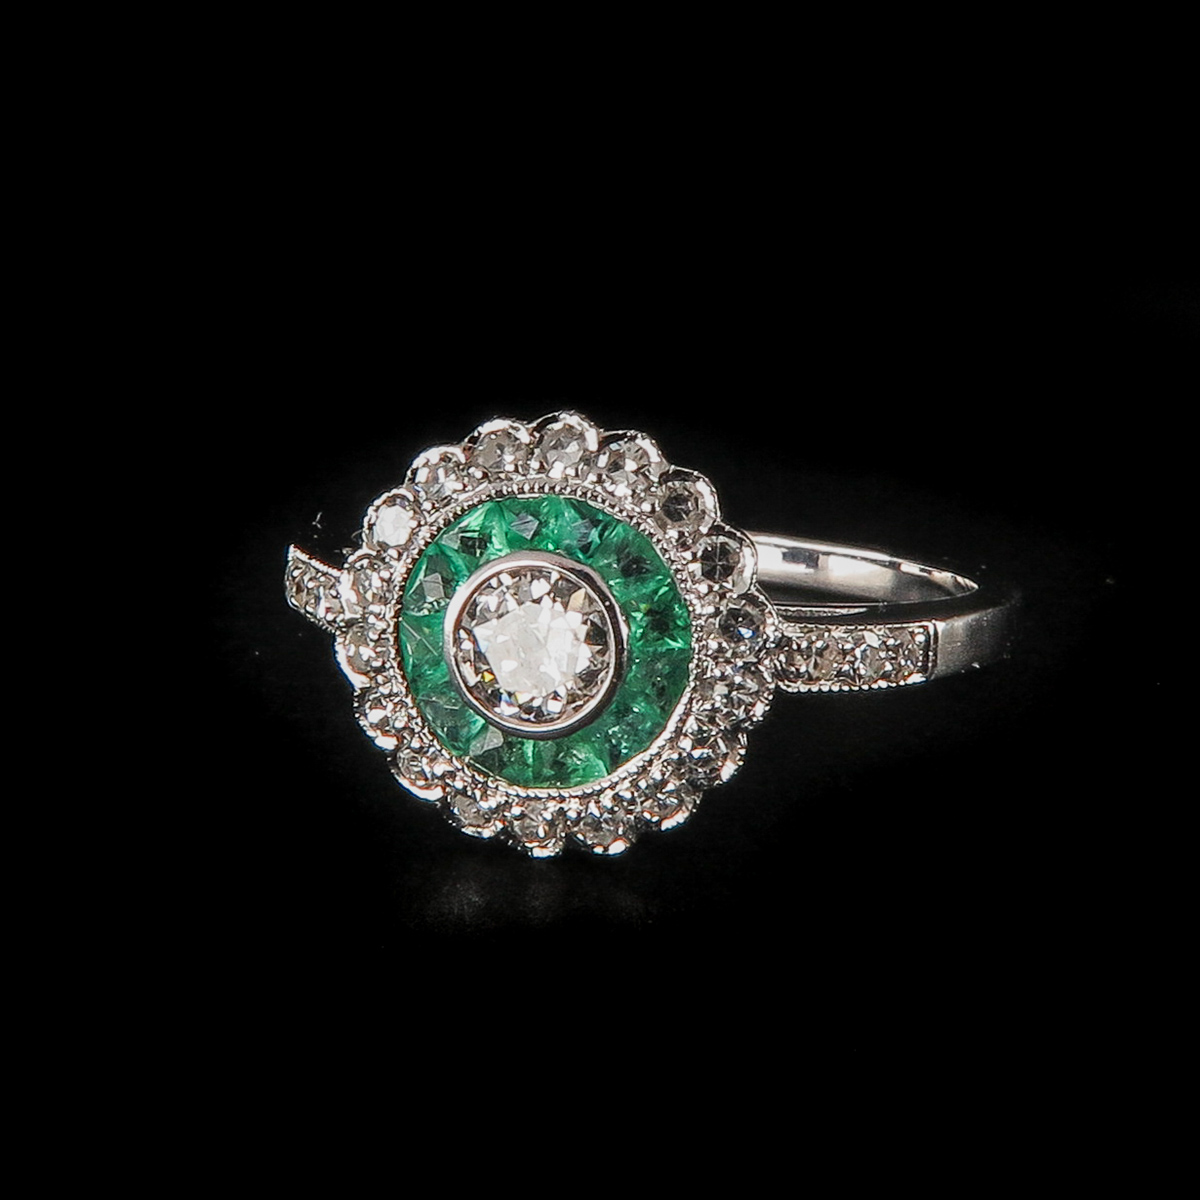 A Ladies Emerald and Diamond Ring